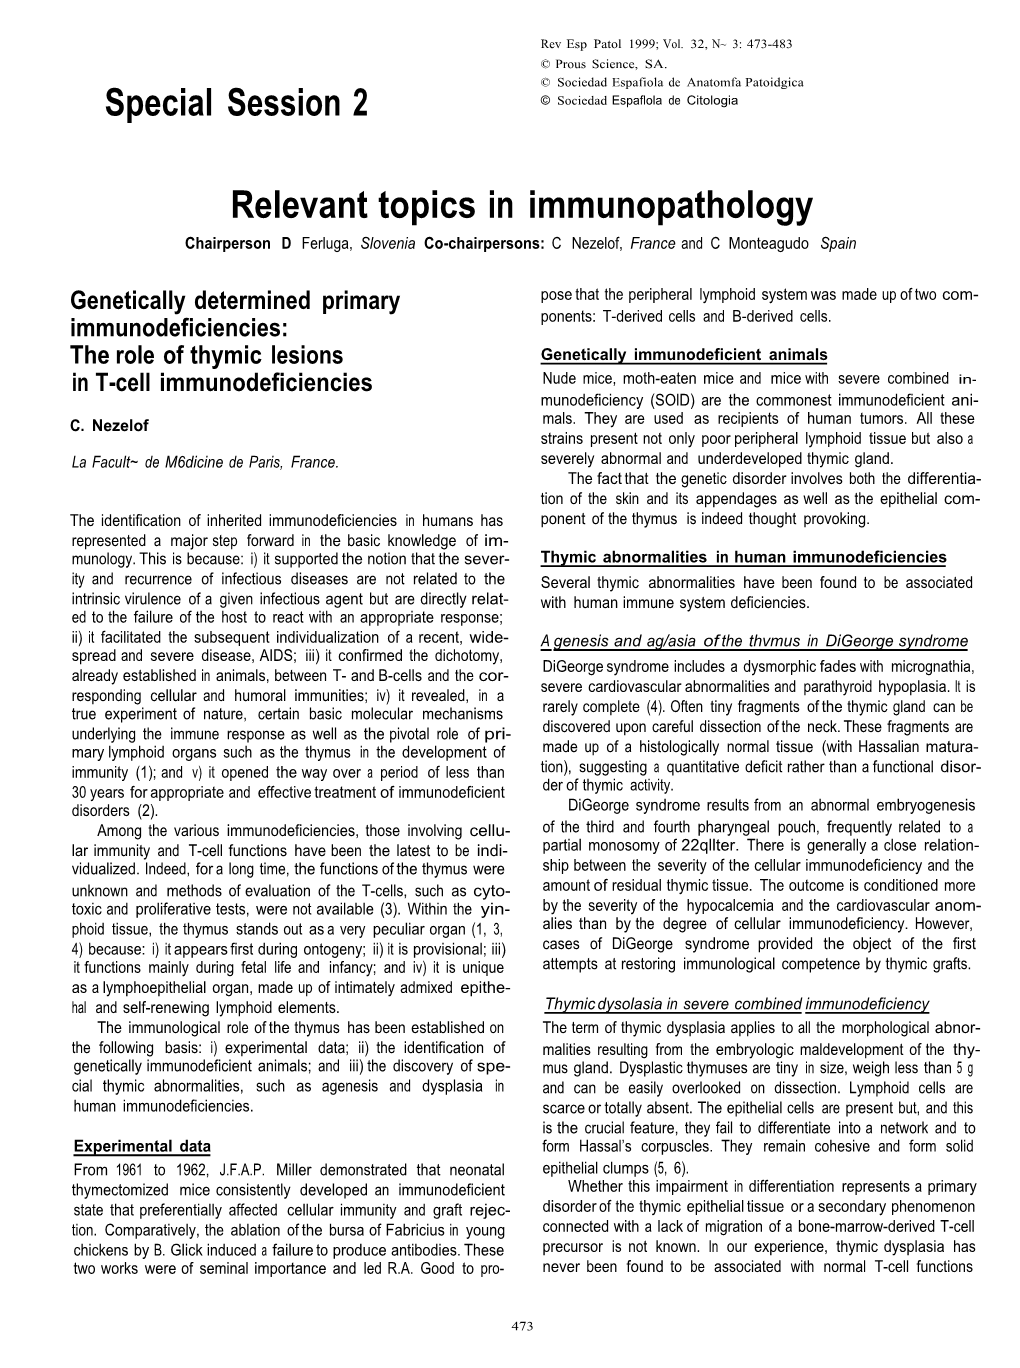 Special Session 2 Relevant Topics in Immunopathology